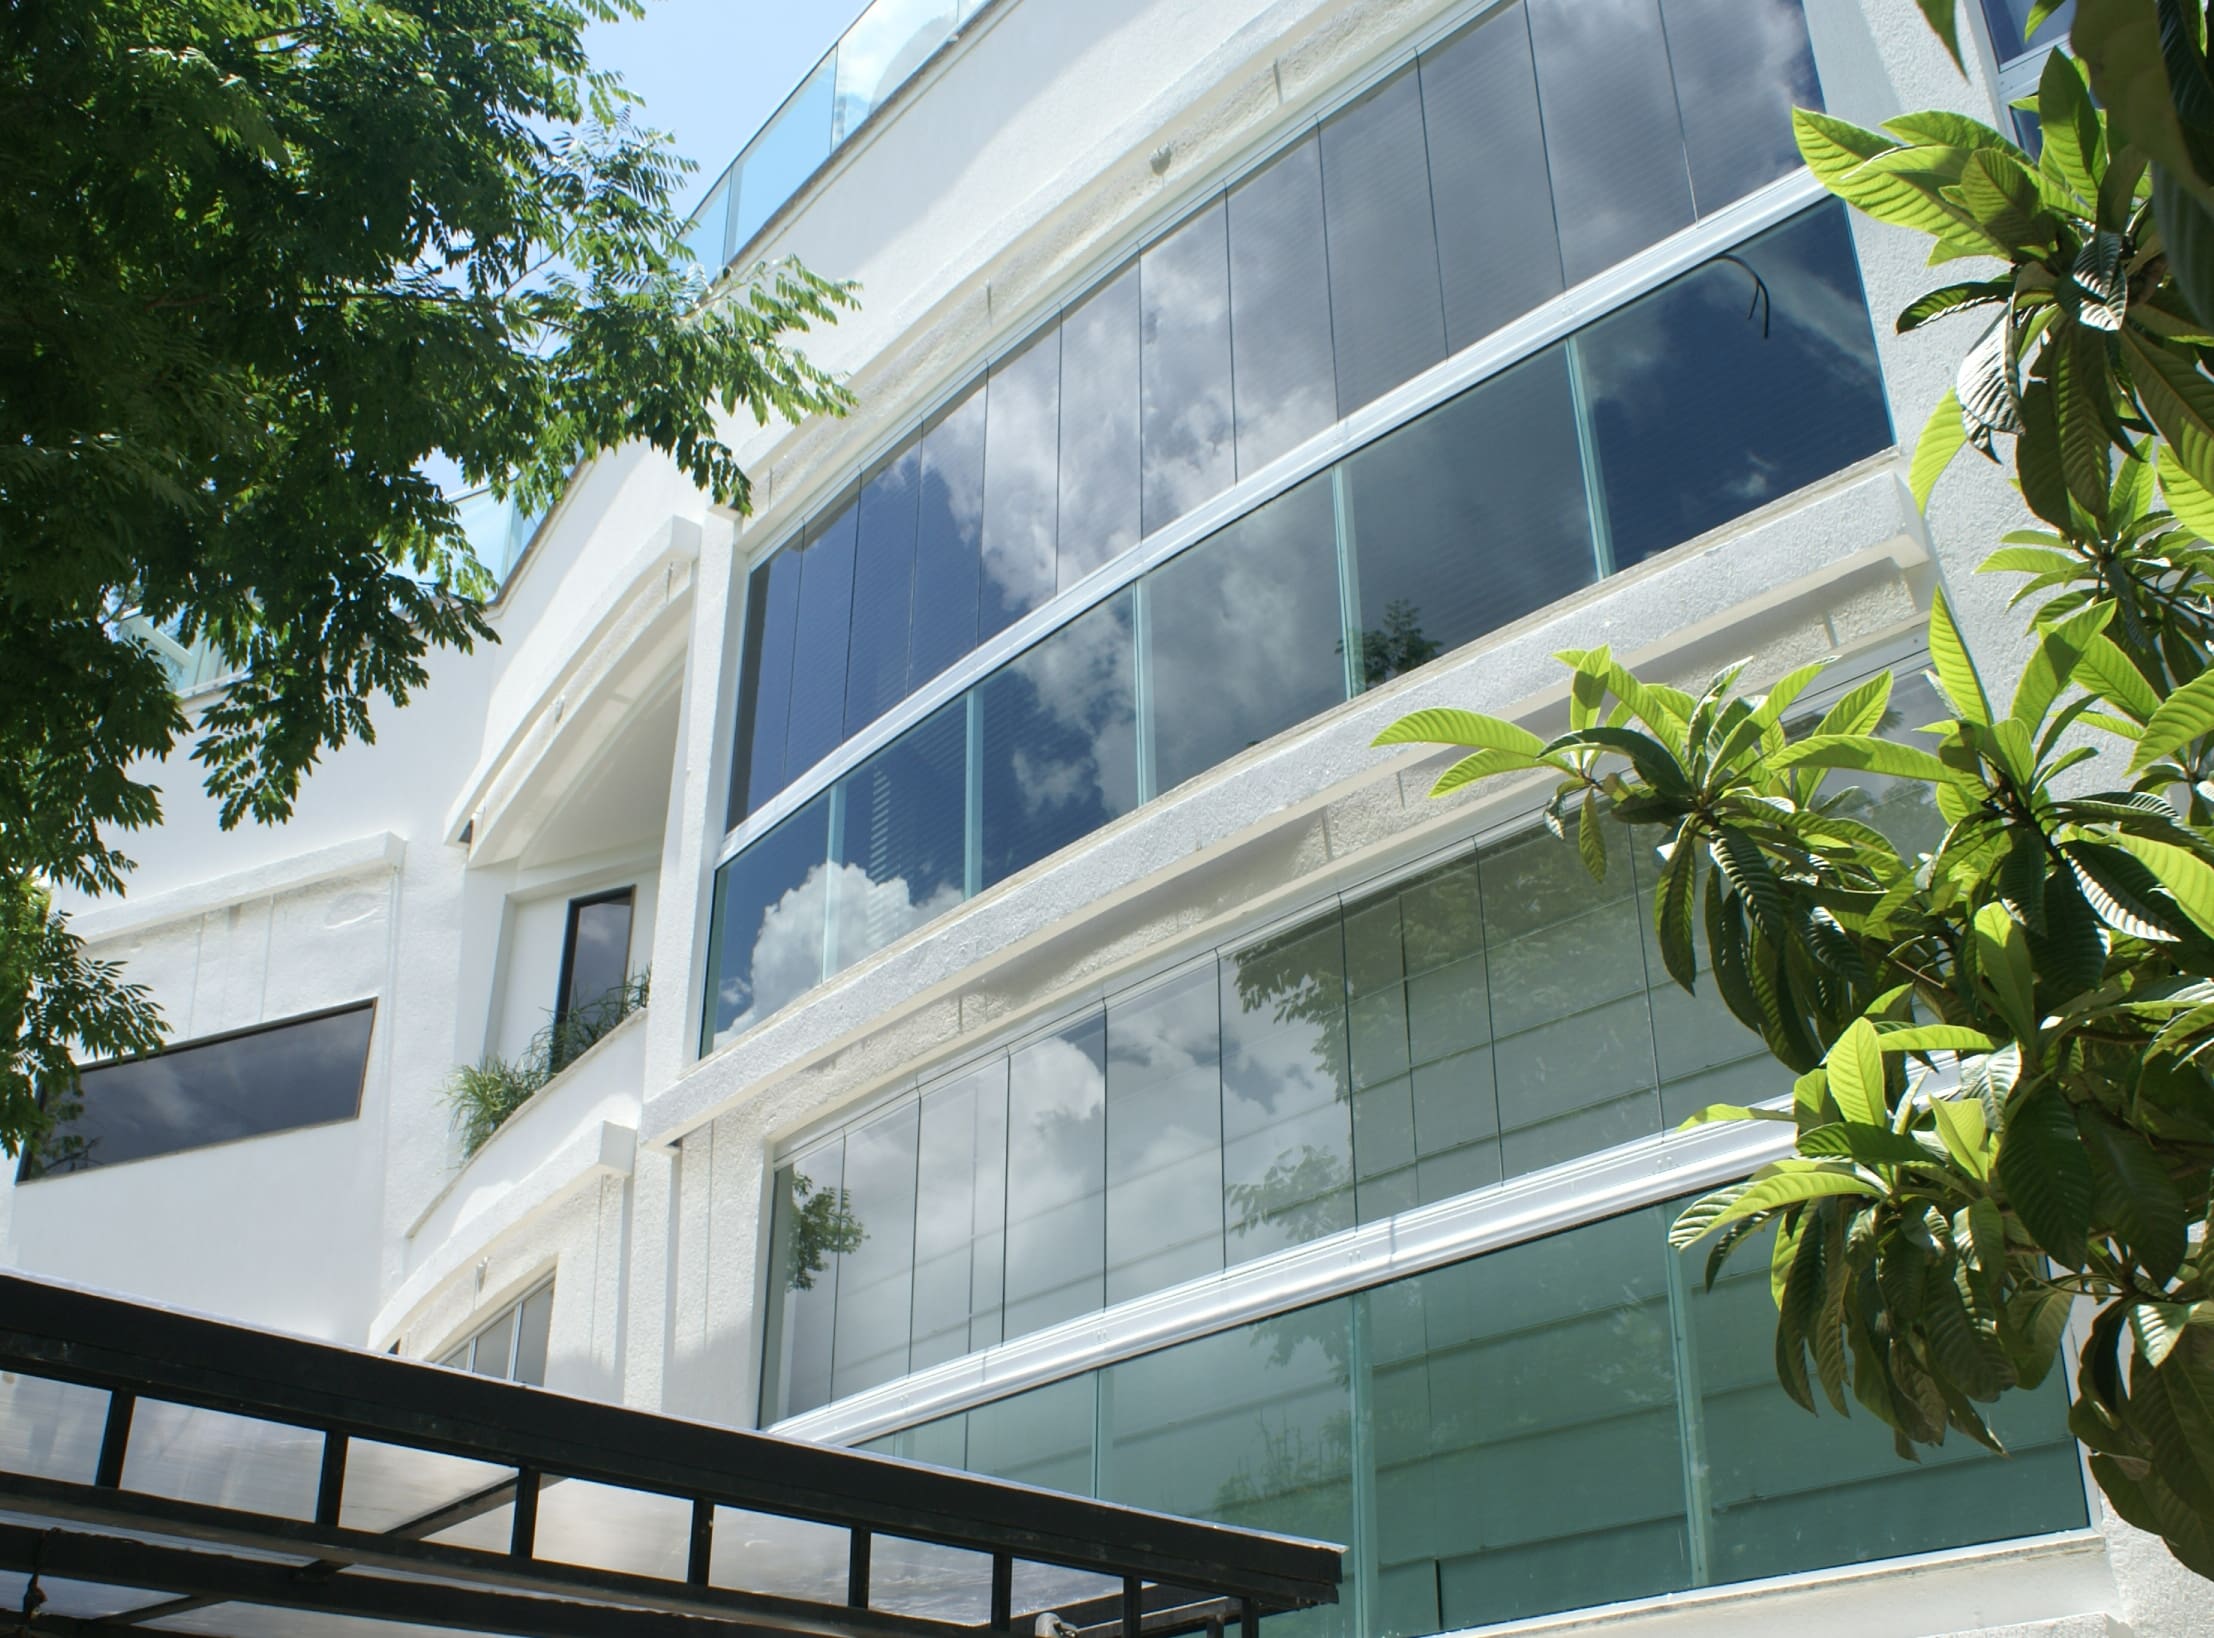 A front view of the Rio Holiday Boutique Hotel showing modern design and curved glass windows.